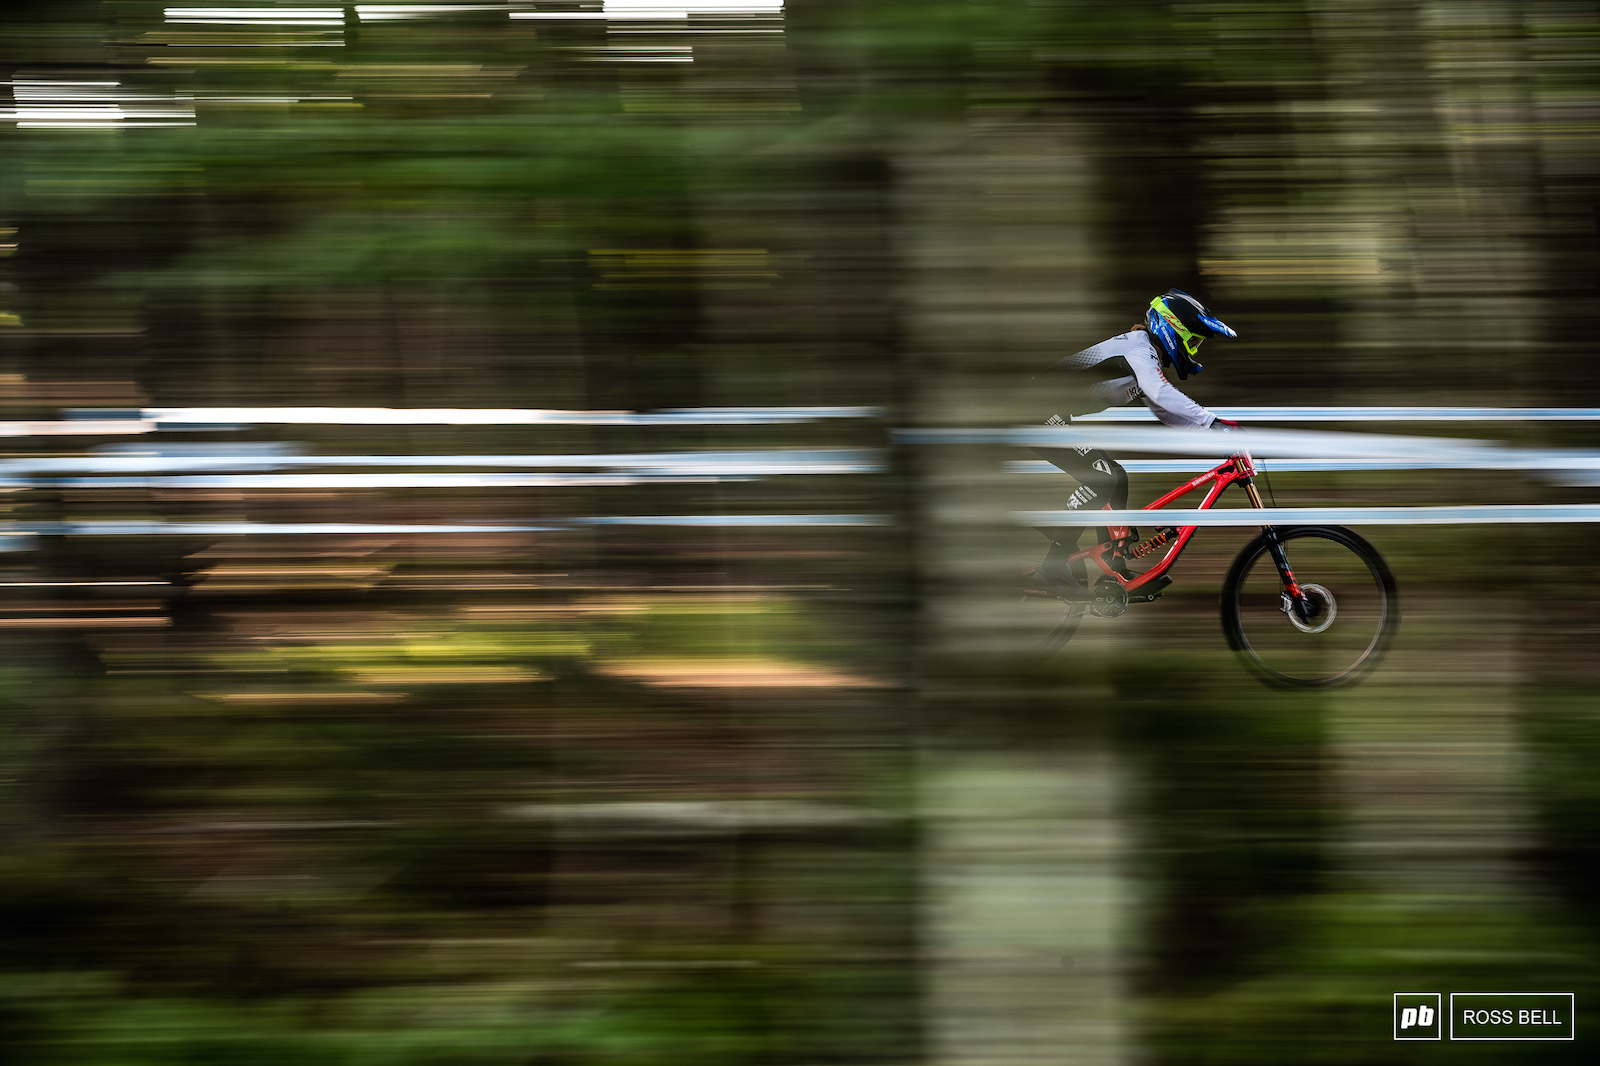 Veronika Widmann blasting through the trees at the very start of the track.